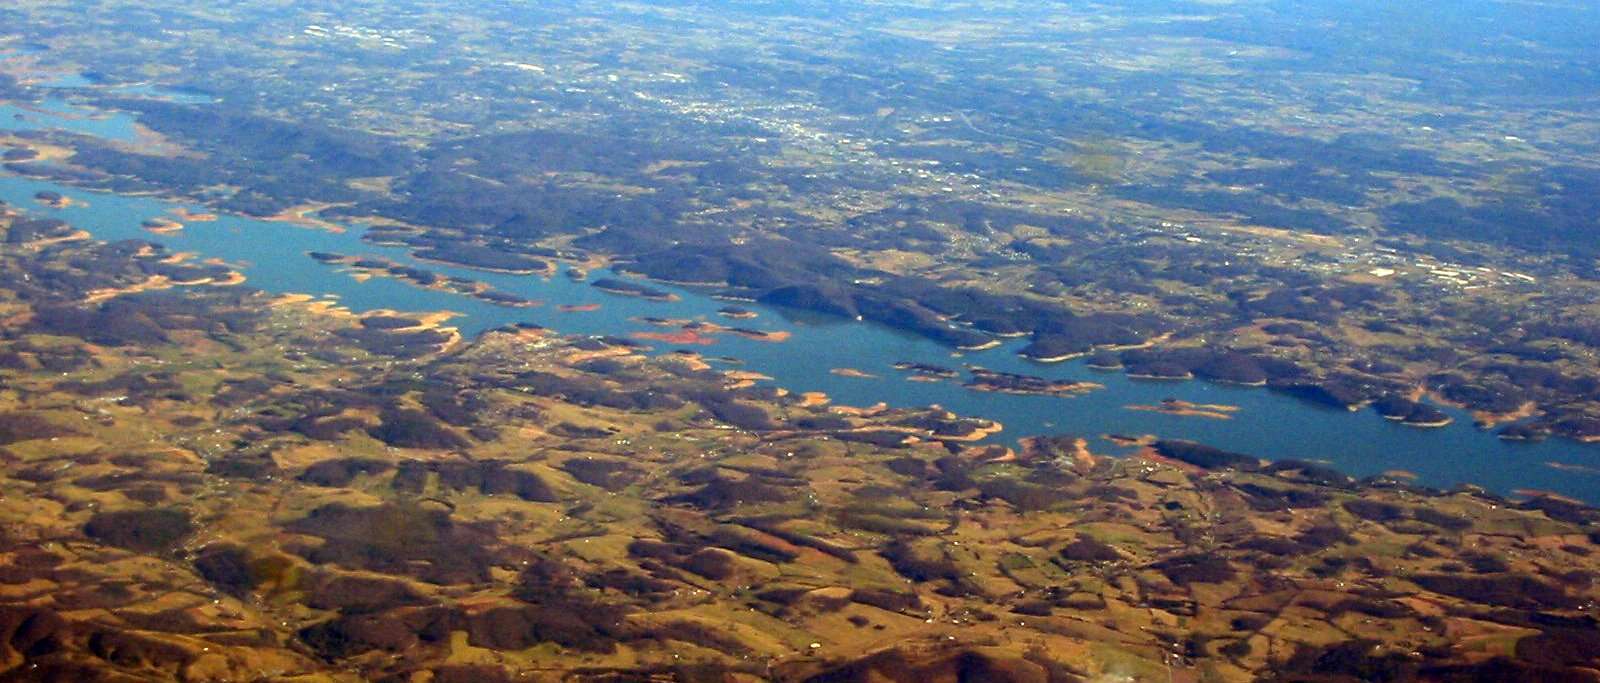 Located in the Tennessee Valley, Lake Cherokee sits between the Appalachian Mountains and the Cumberland Plateau. The lake is 52 miles upstream from where the Holston and French Broad Rivers meet to form the Tennessee River. Cherokee Dam is about a 45-minute drive from downtown Knoxville. 